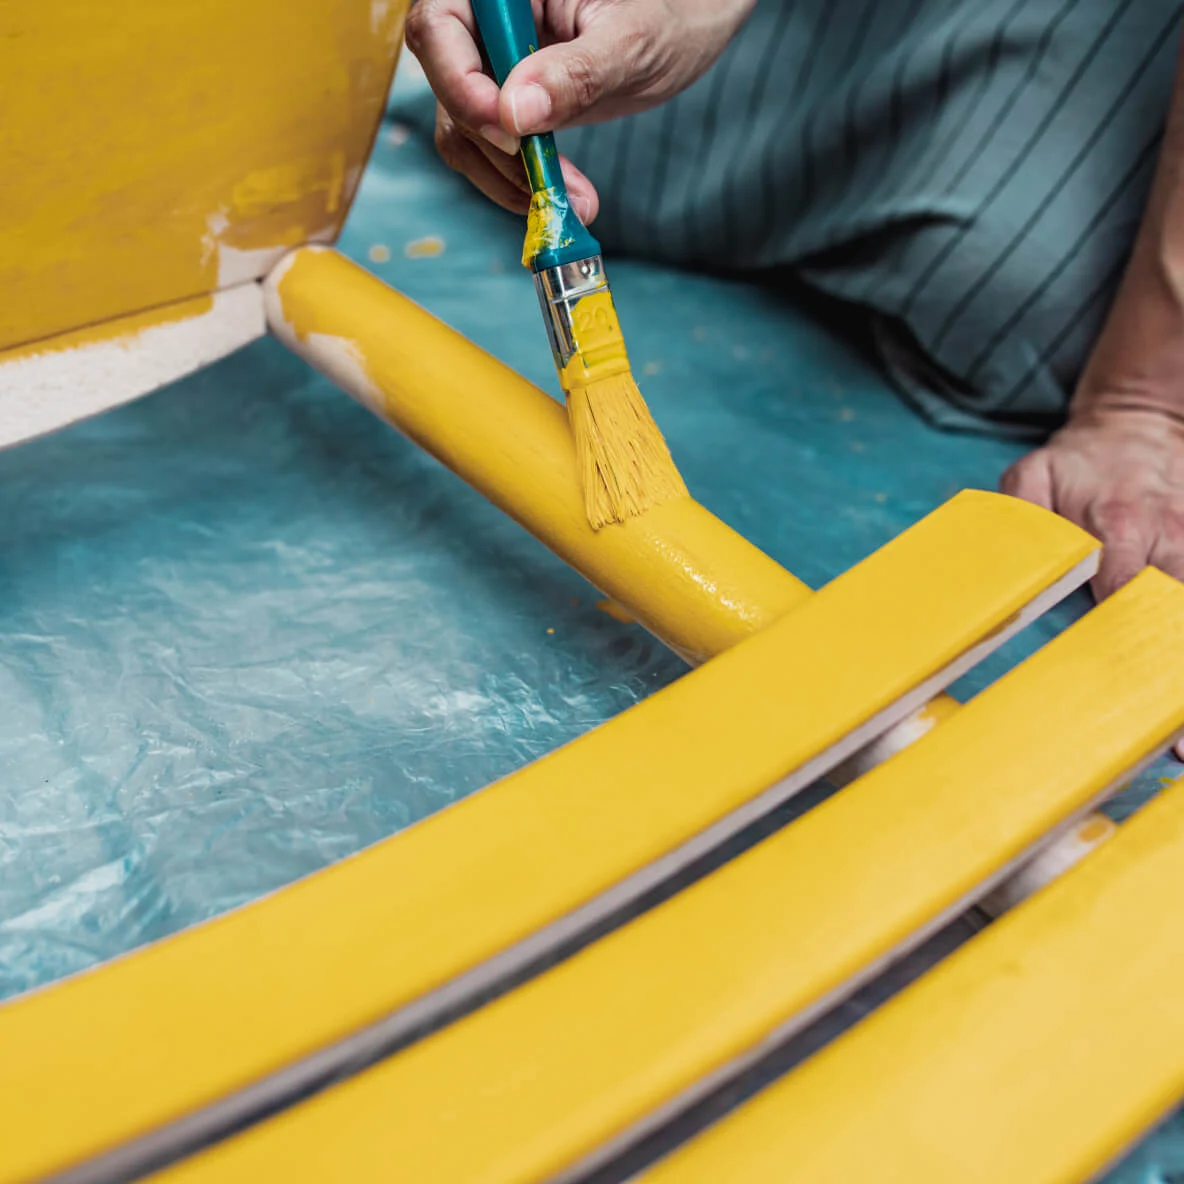 A pair of hands paints a wooden chair yellow with a brush. The chair is placed on a tarp to protect the ground. The focus is on the upcycling process rather than the person.